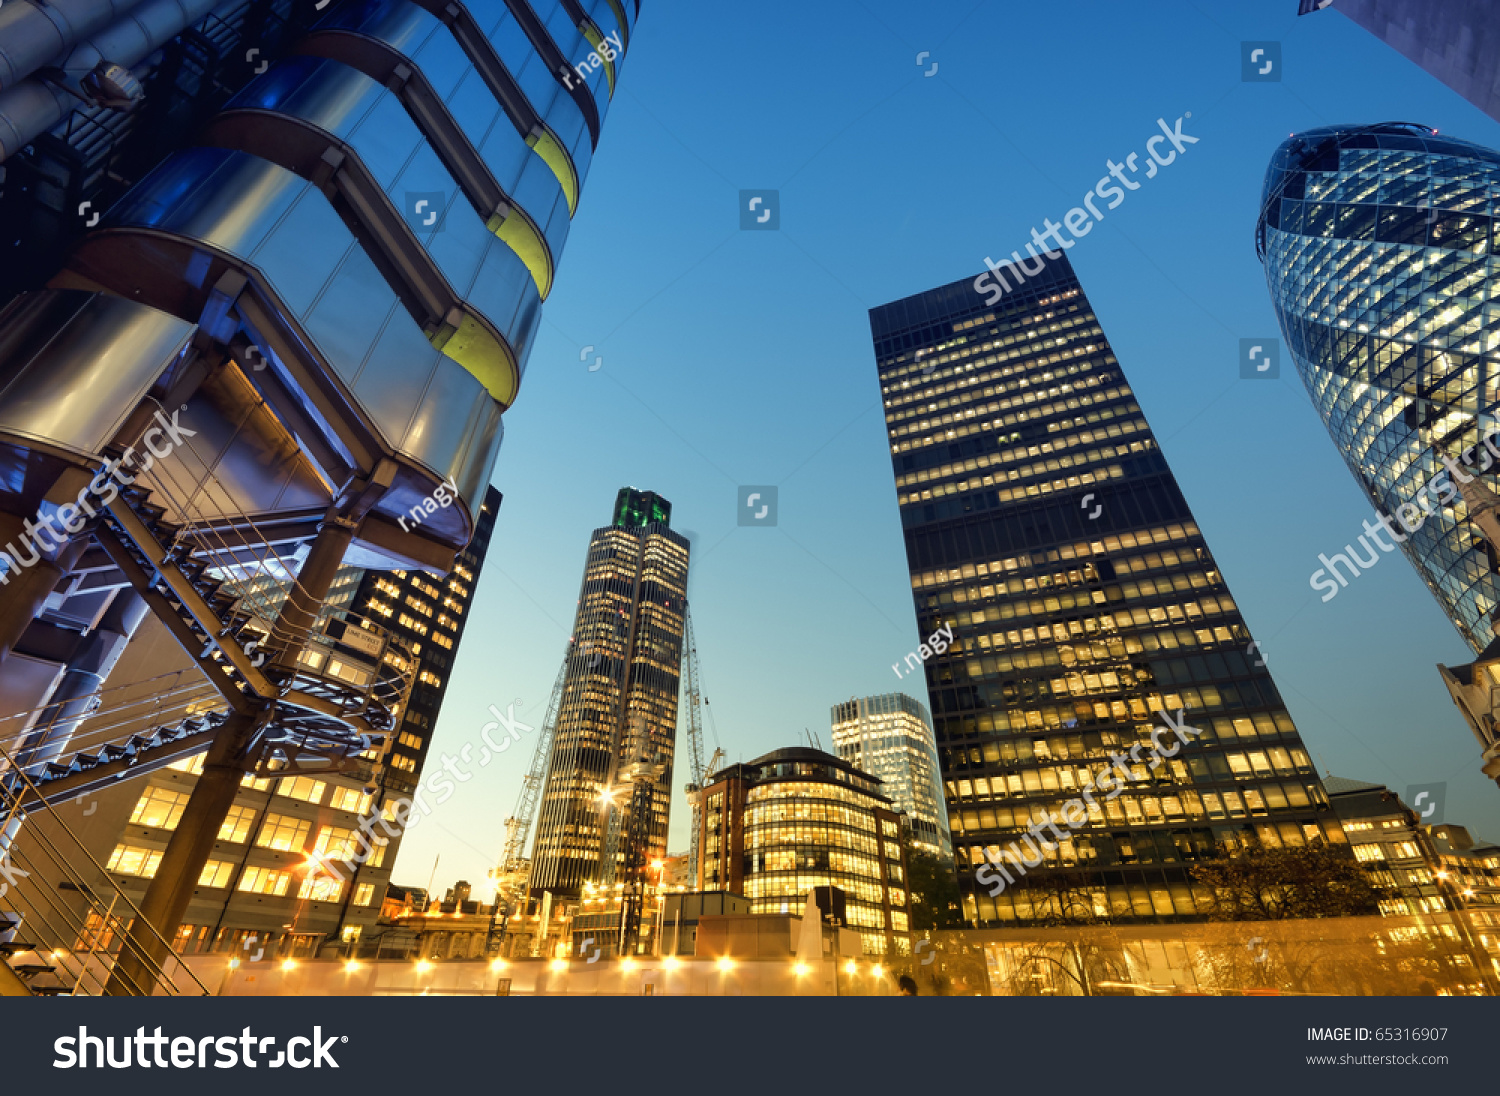 Skyscrapers of City of London at night #65316907